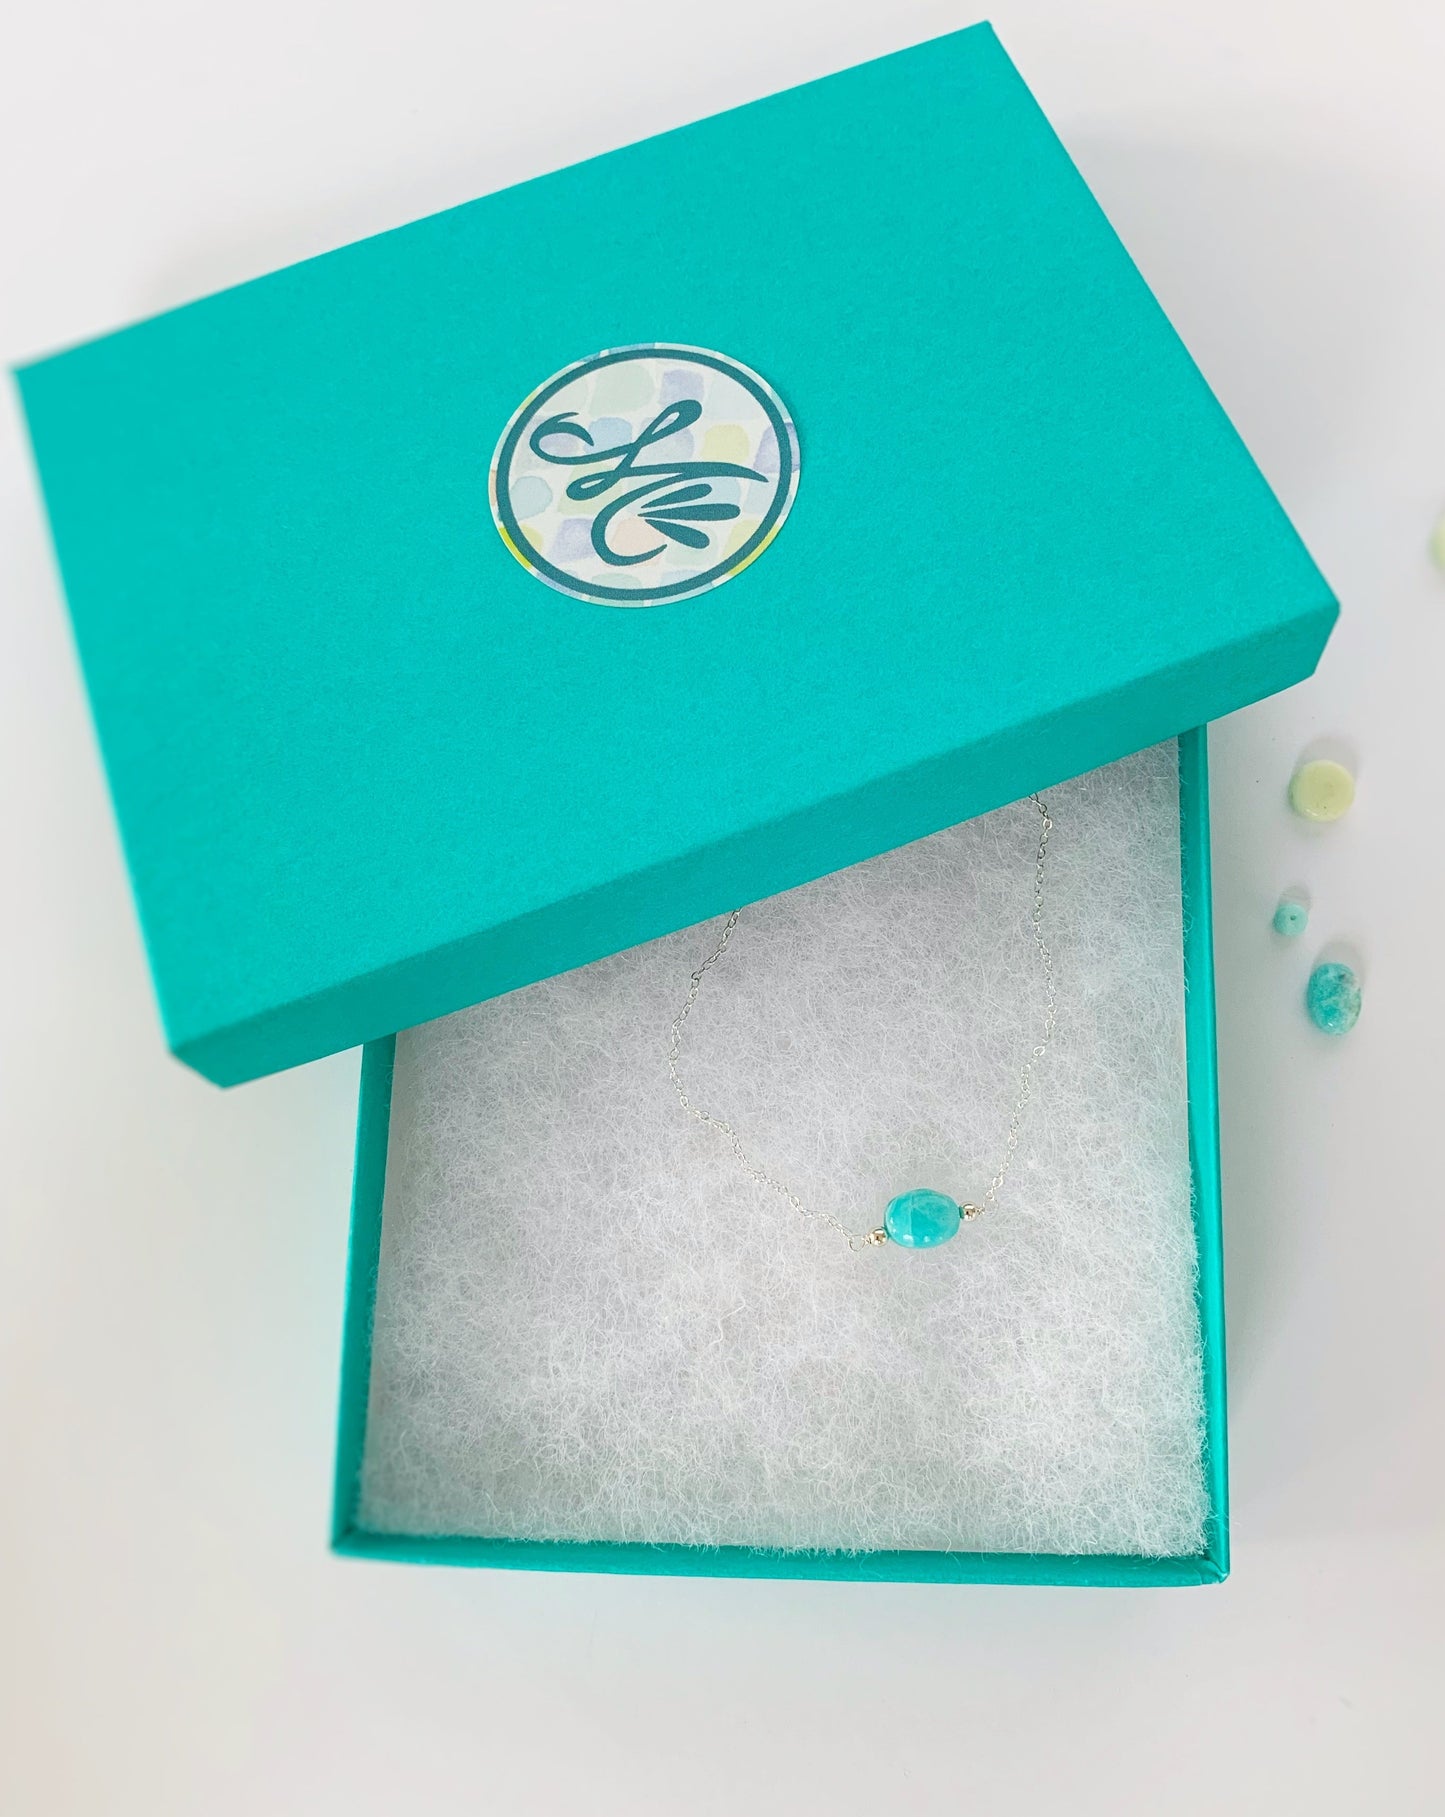 Boxed picture of the sterling silver adjustable laguna bracelet. The laguna bracelet has sterling silver findings and chain with a bright aqua, oval shaped amazonite bead at the center of the bracelet. This one is pictured in a cotton lined teal gift box with an M mermaids and madeleines logo on the lid. The item is photographed on a white background